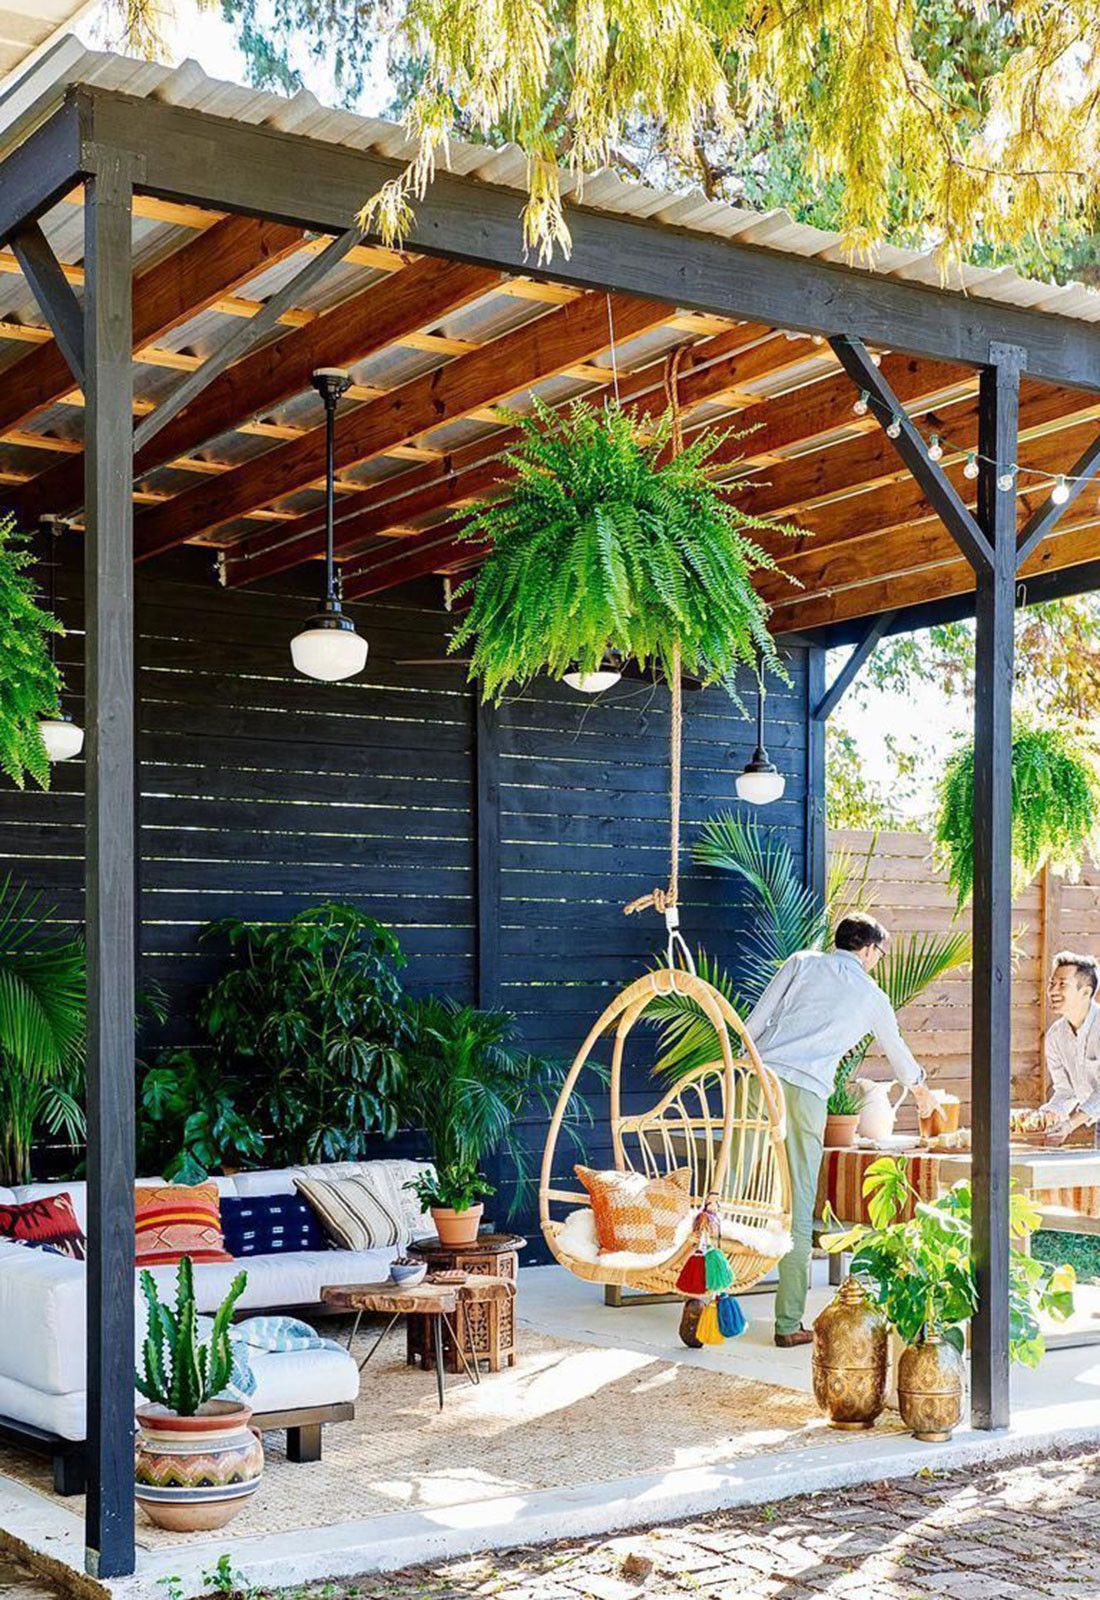 Enhancing Your Outdoor Living Space with a Covered Deck